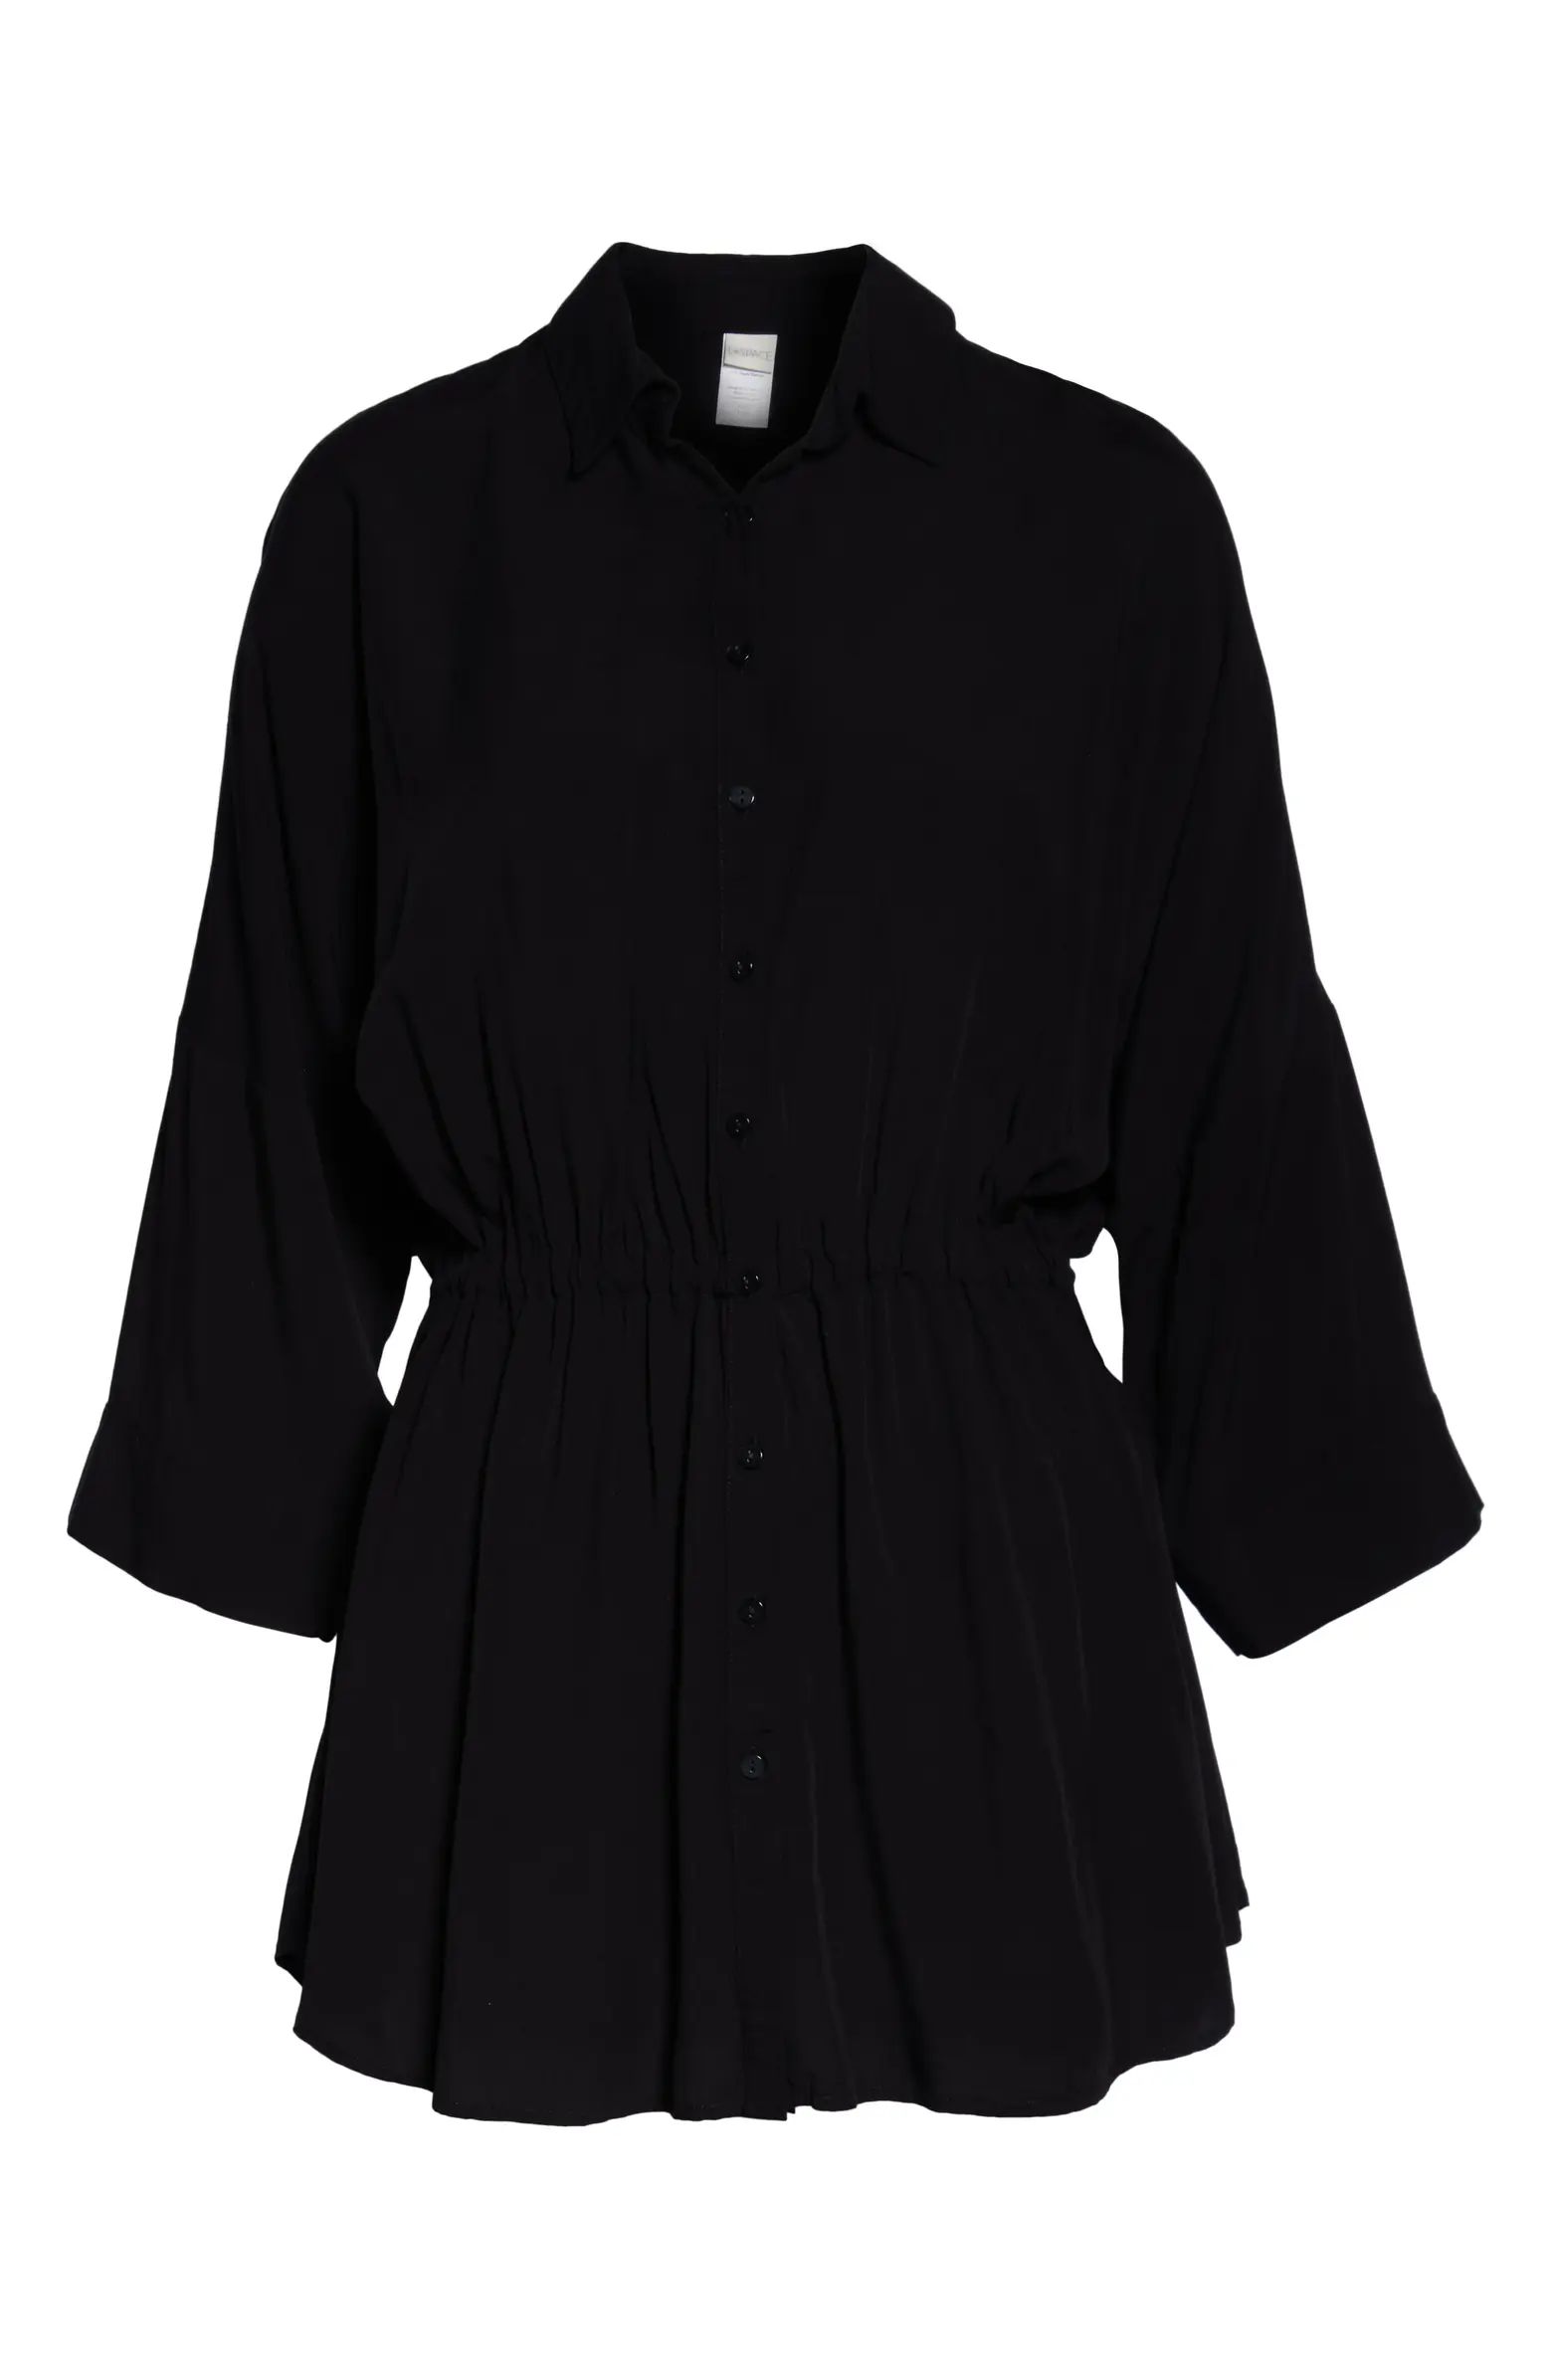 Pacifica Cover-Up Tunic | Nordstrom